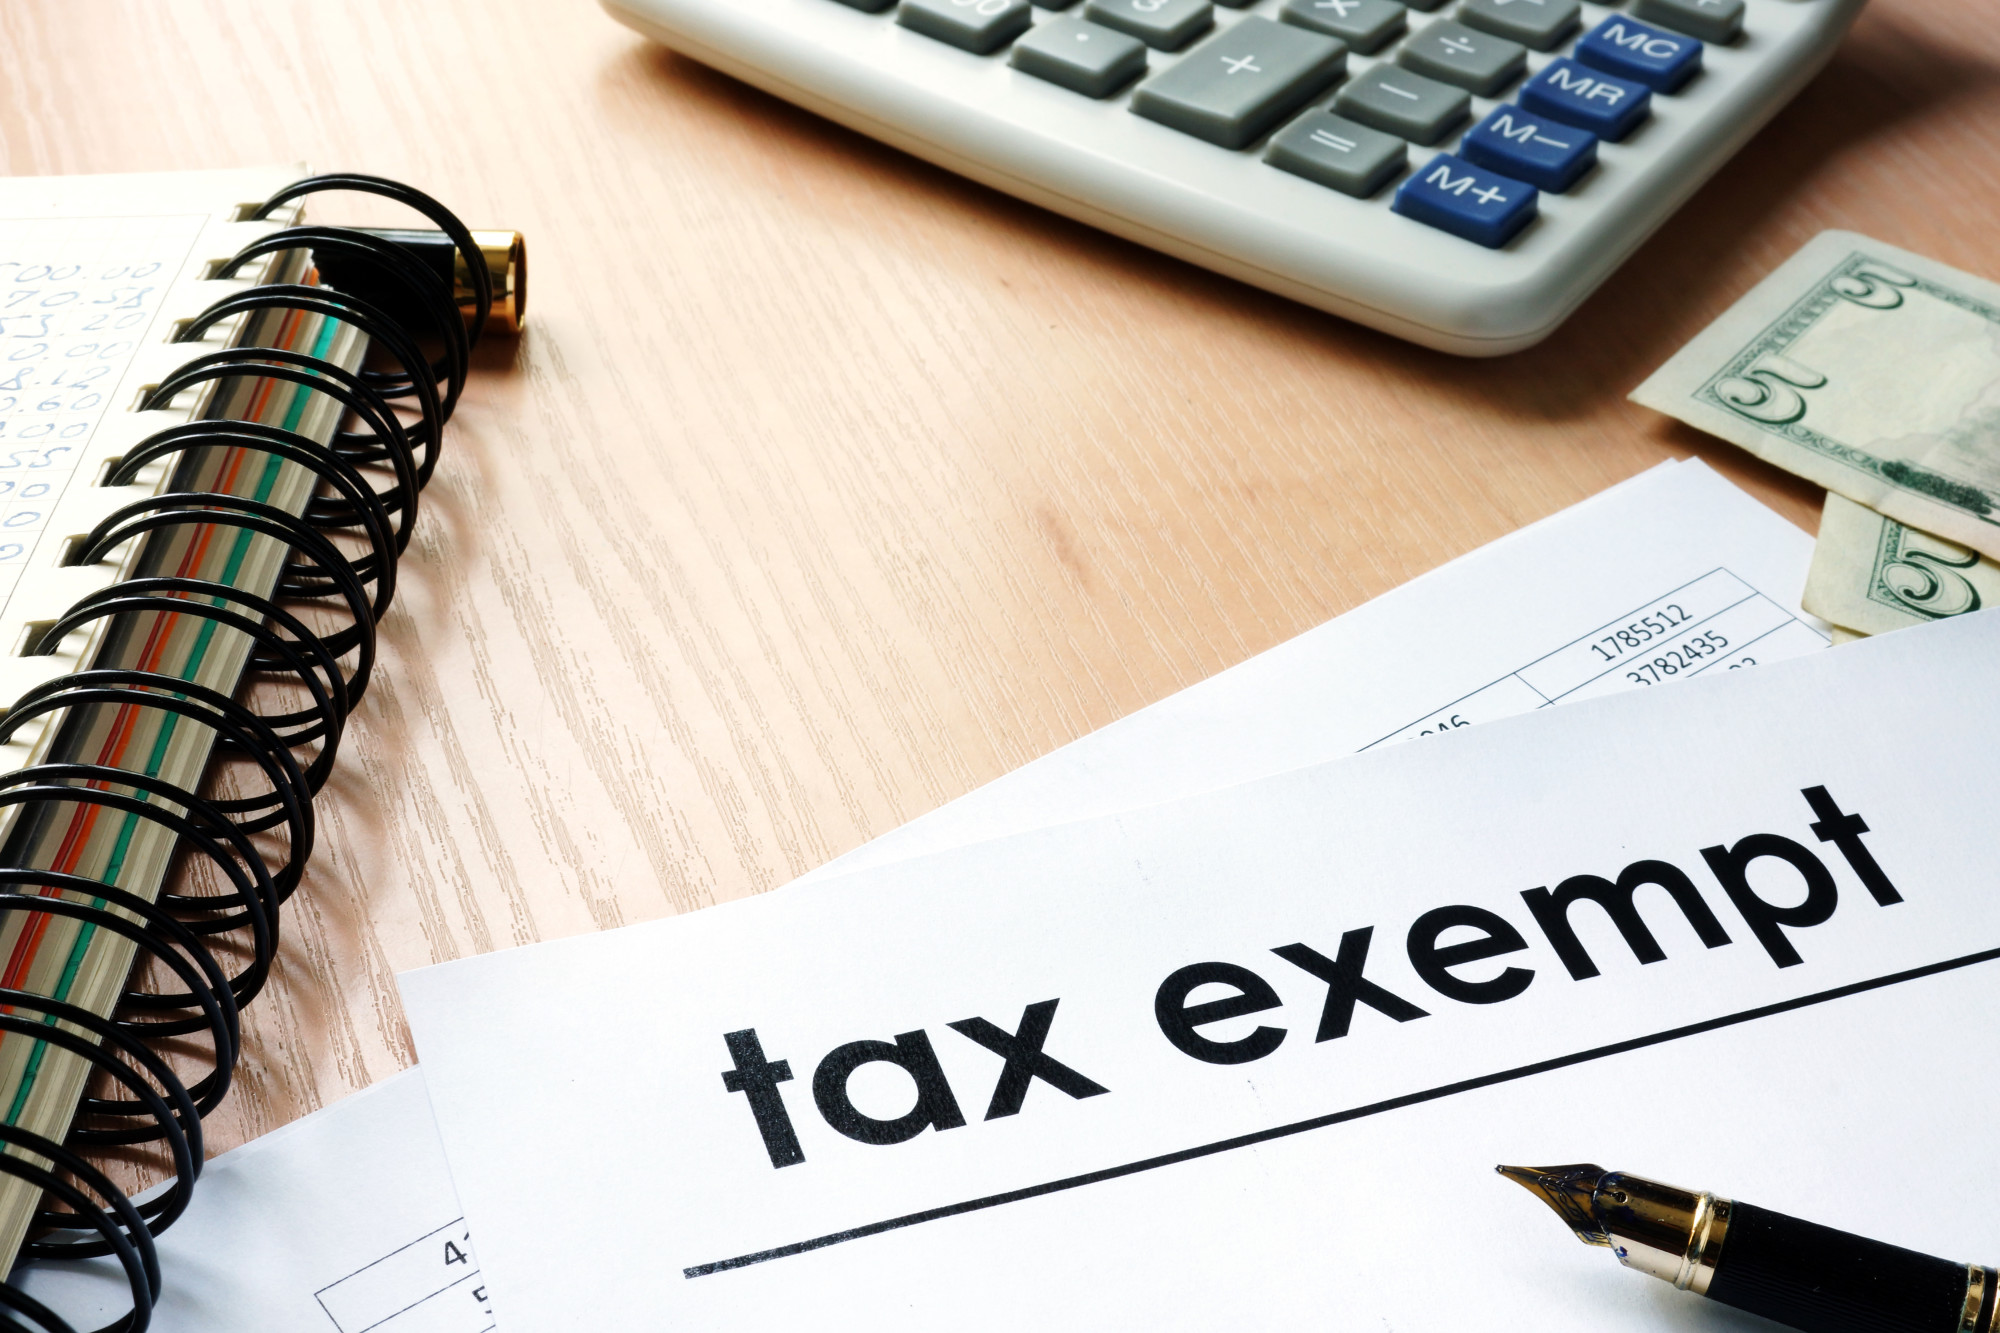 If you live in Texas, chances are you're overpaying on your property taxes. Get the quick facts on key property tax exemptions in Texas here.